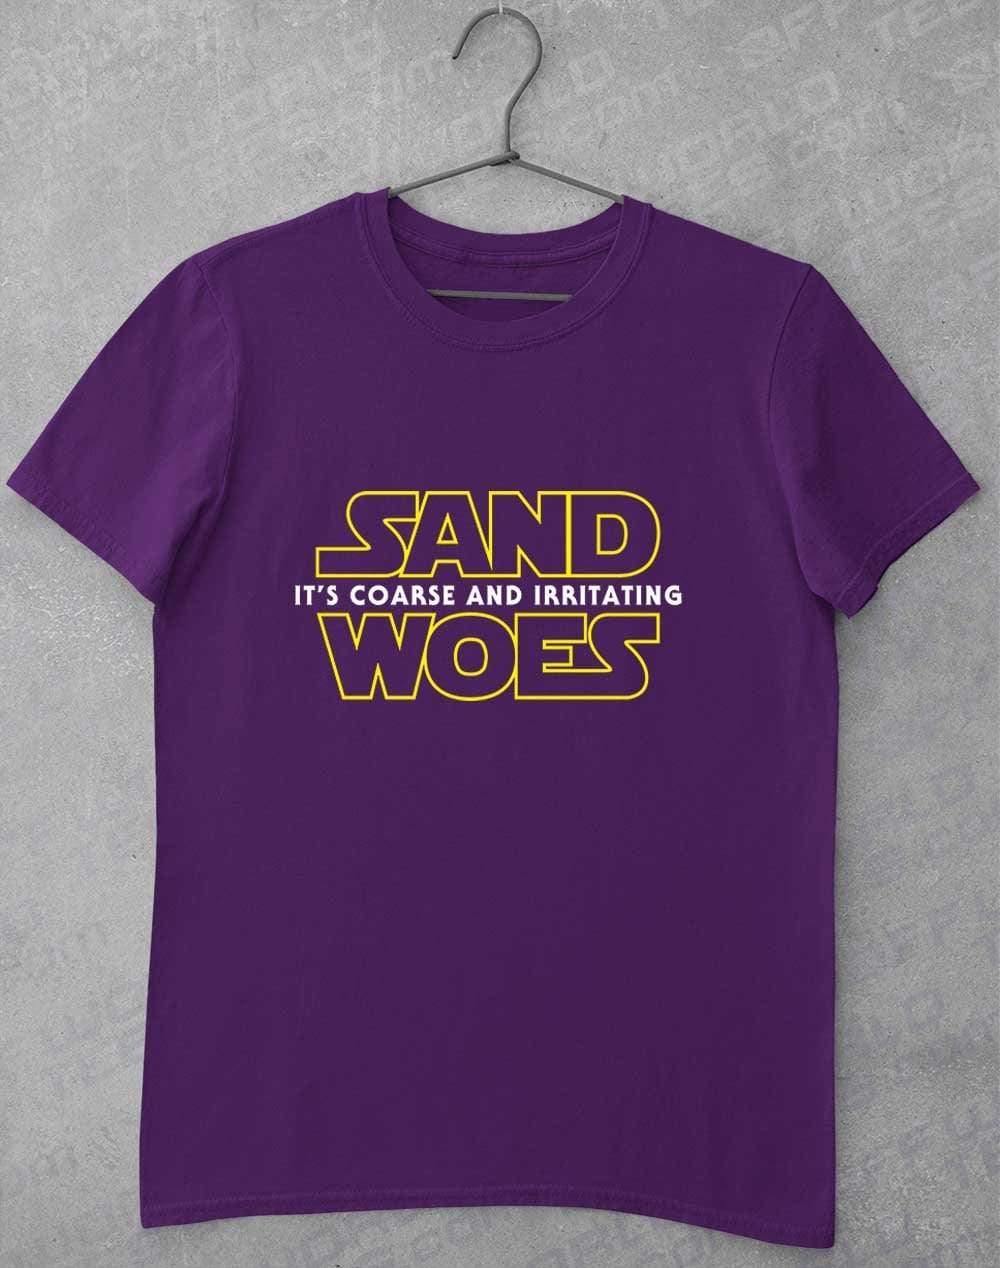 Sand Woes - T-Shirt S / Purple  - Off World Tees